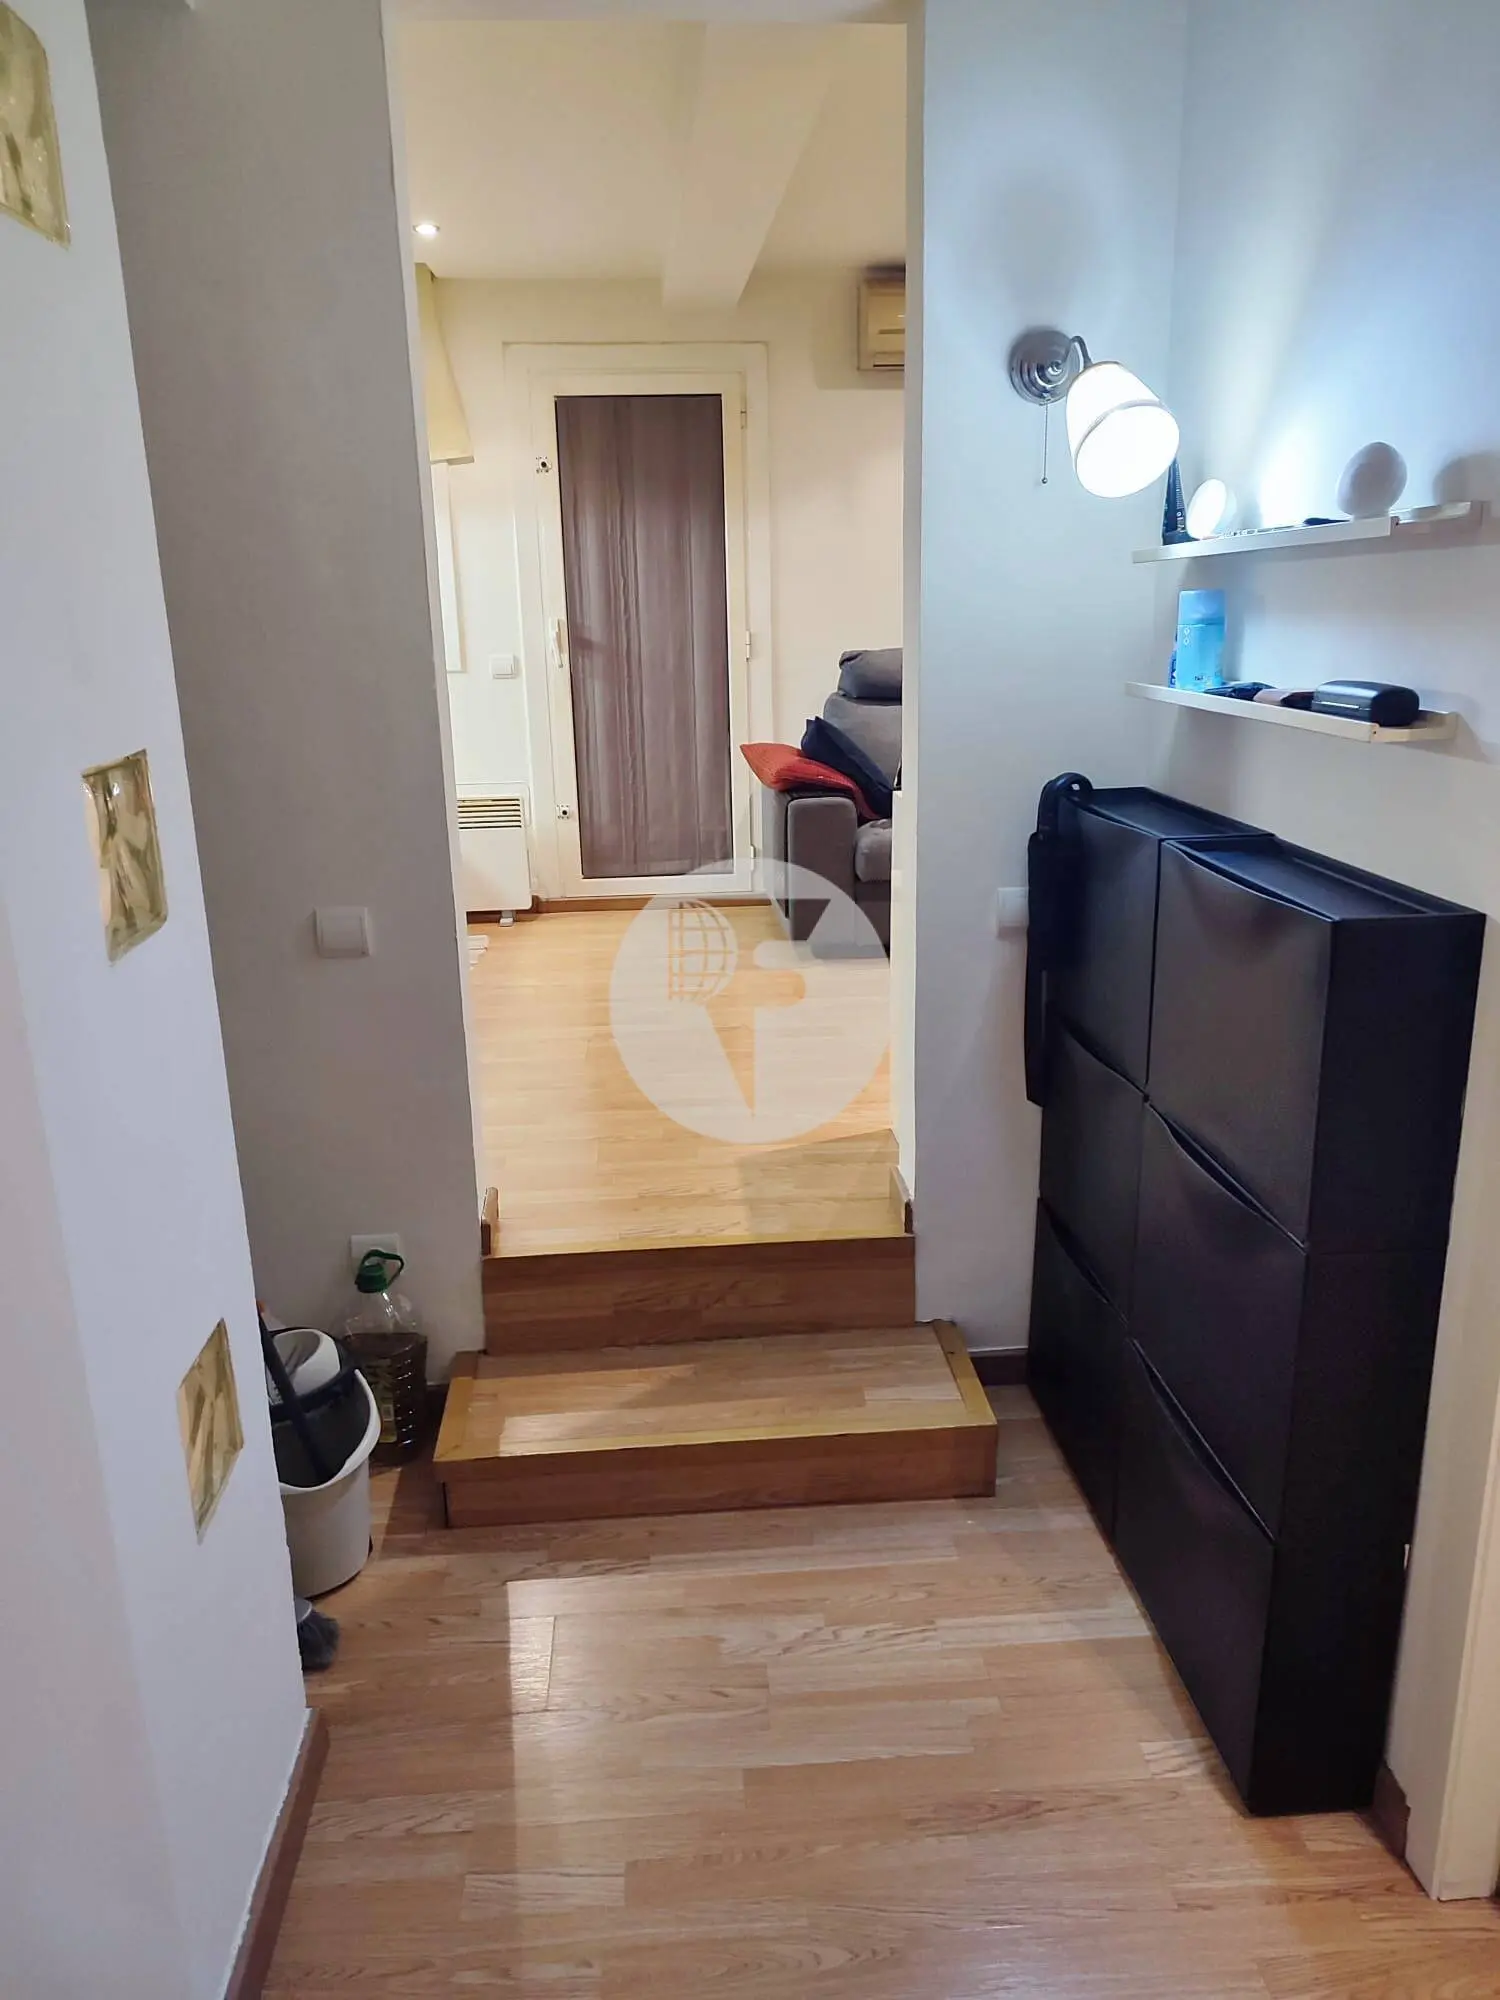 Magnificent apartment located in the Poble Sec neighborhood. 7